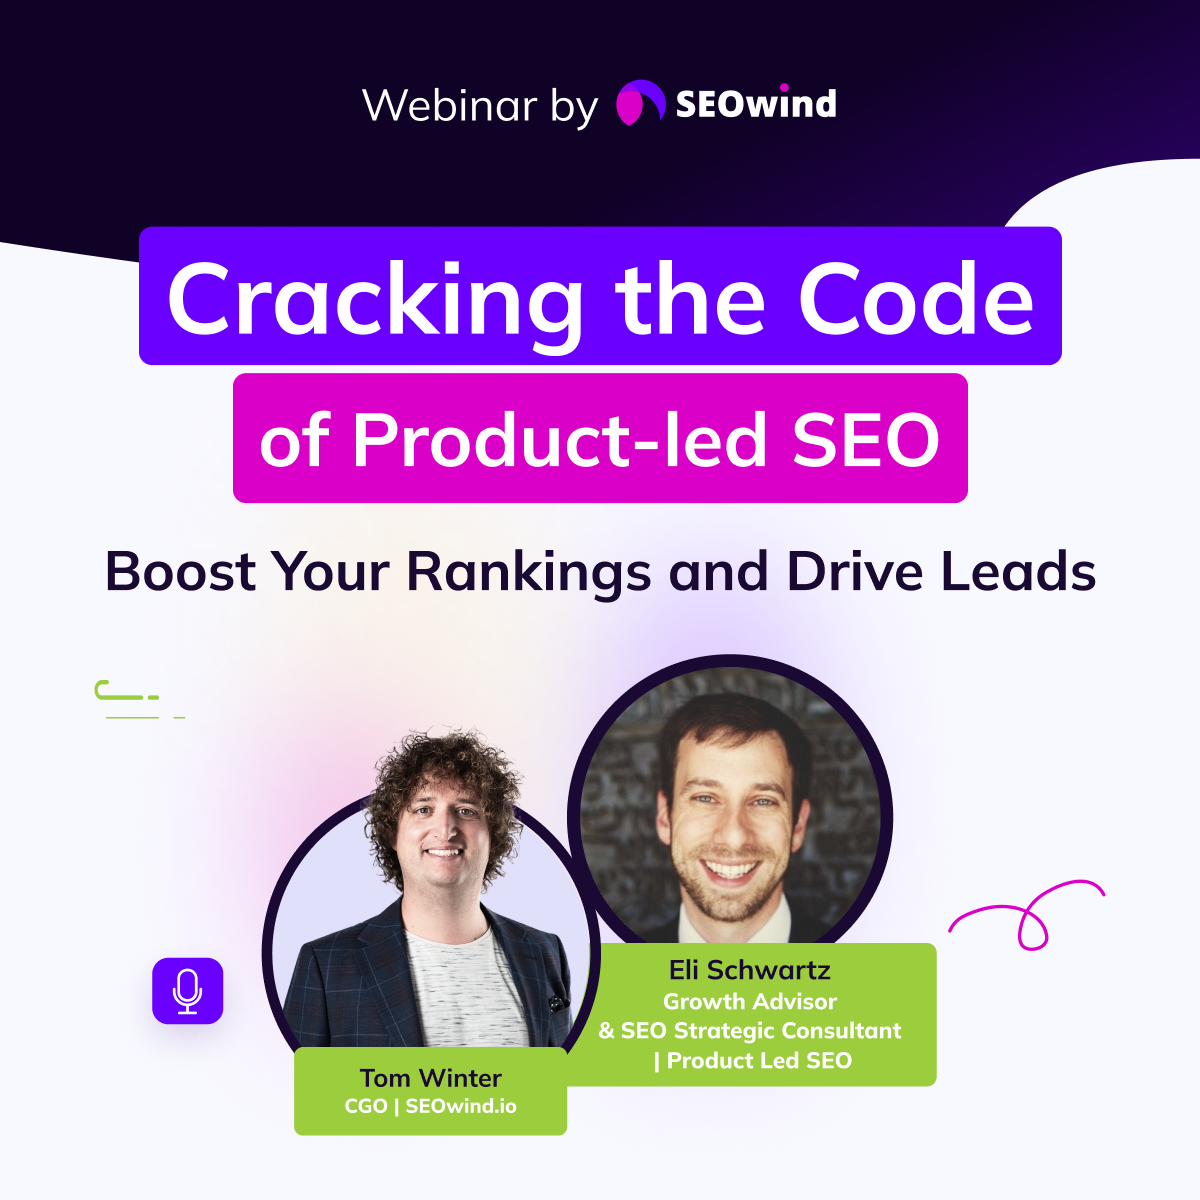 Cracking the Code of Product-led SEO: Boost Your Rankings and Drive Leads with Eli Schwartz